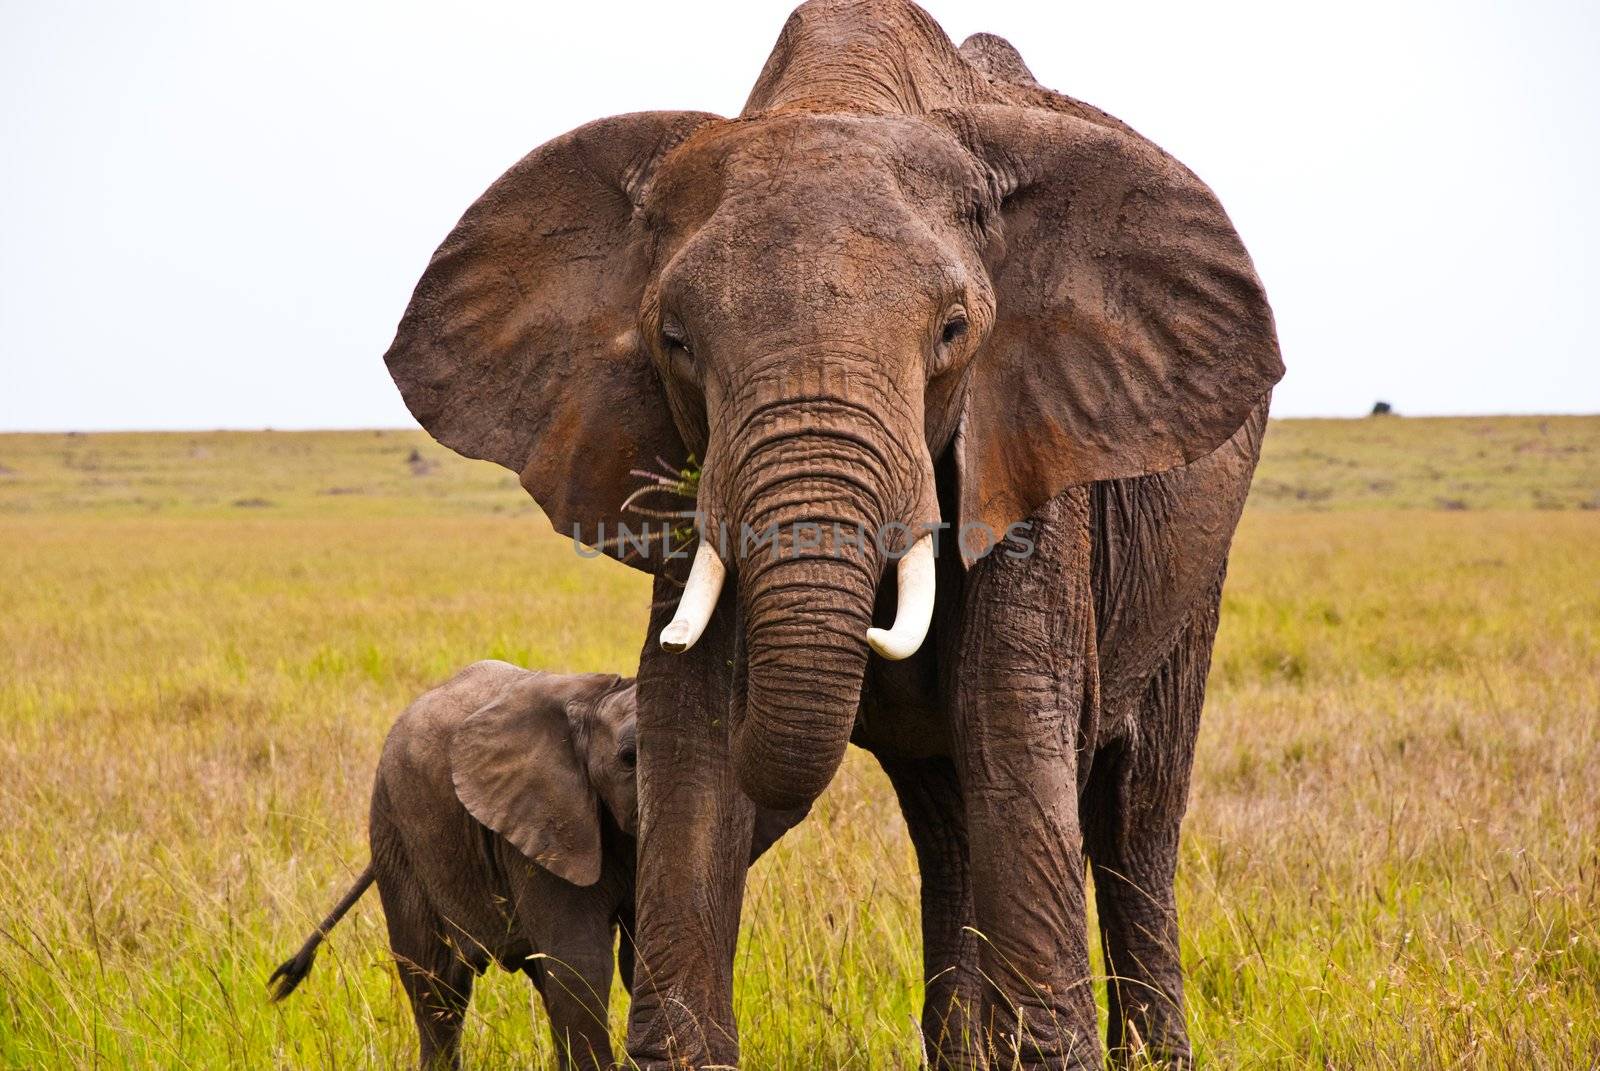 An African elephant protecting its child in Africa
